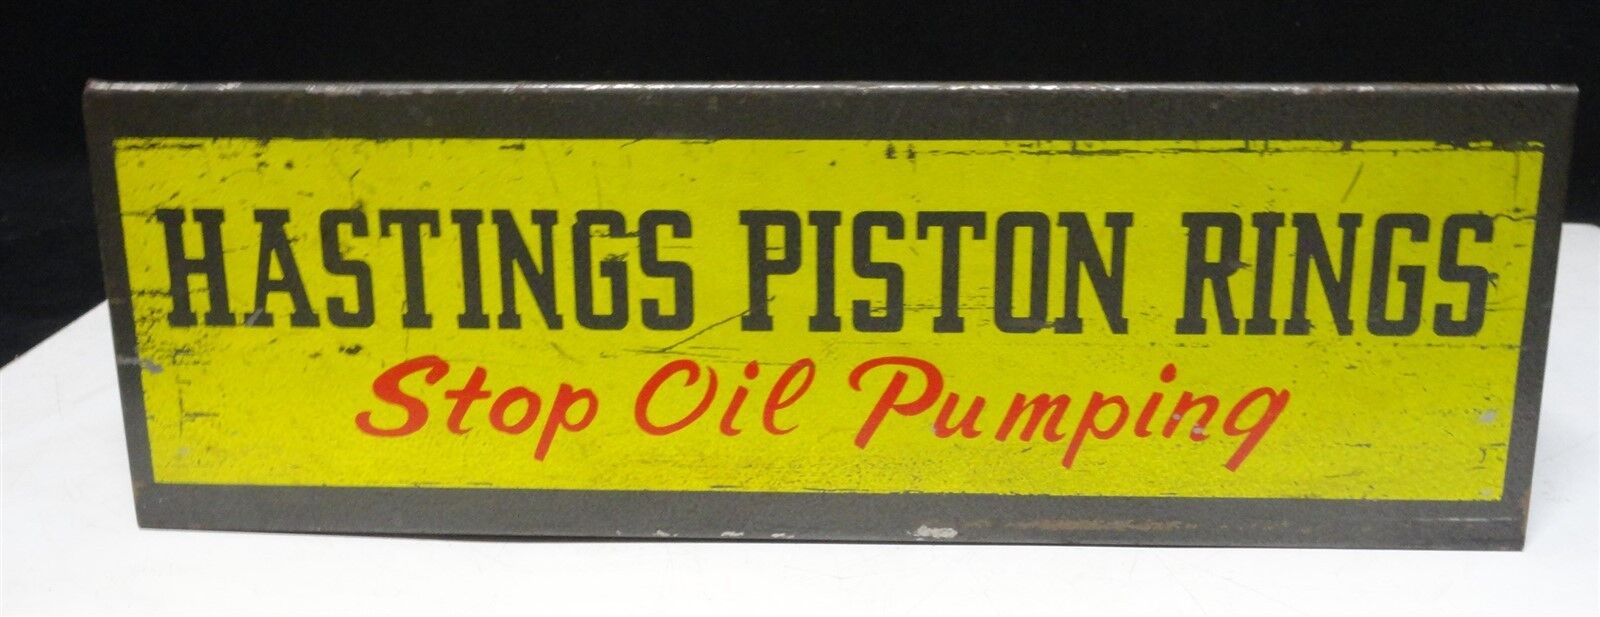 HASTINGS PISTON RINGS - AUTO CATALOG RACK - DISPLAY - STOP OIL PUMPING - STAND 